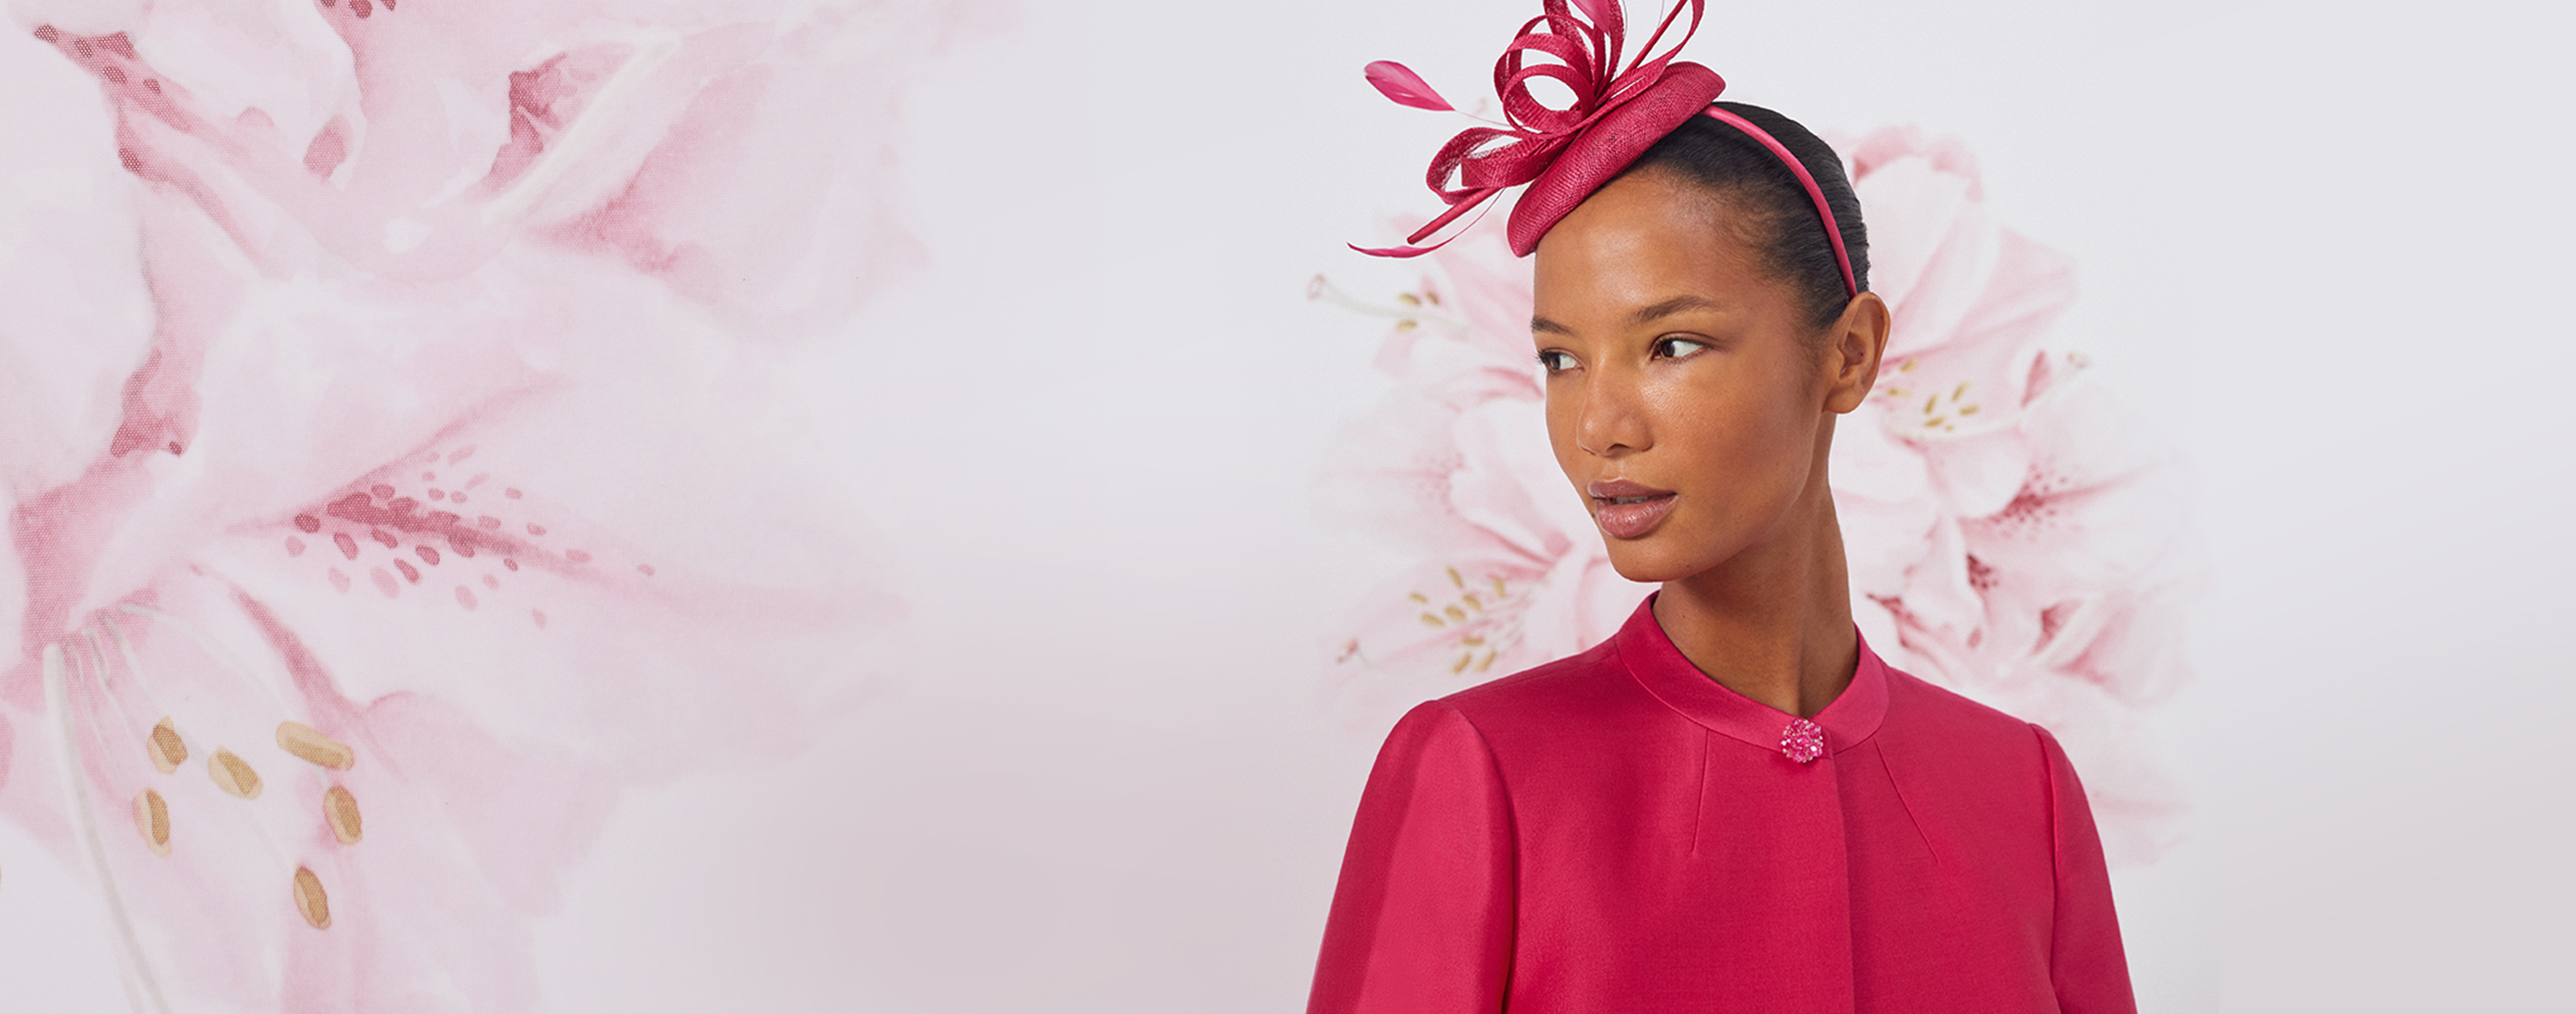 Close up image of model against a floral painted background wearing a Hobbs fuschia pink jacket and fascinator.